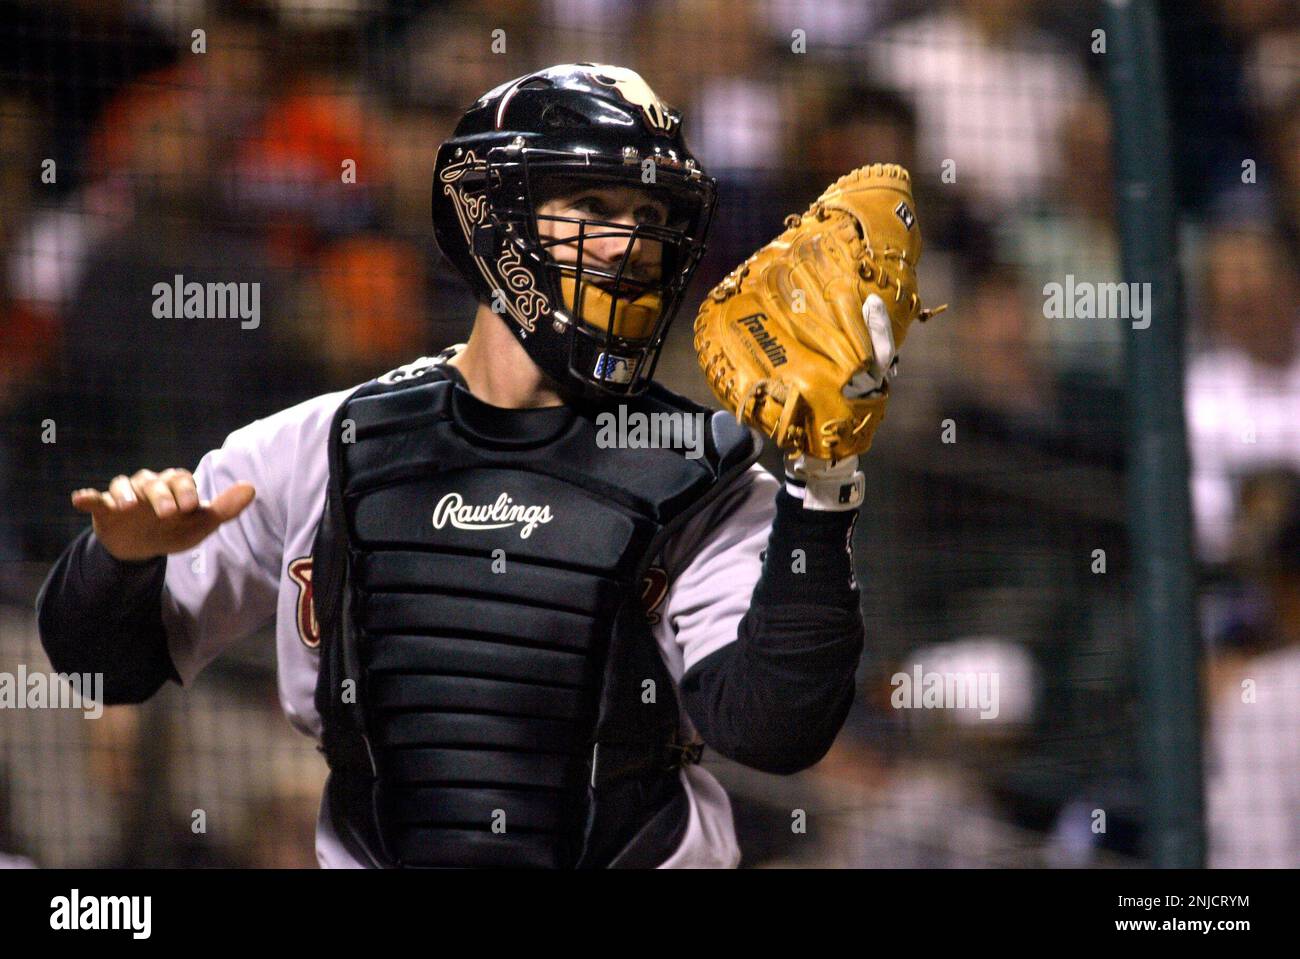 GIANTS 066 LH.JPG Houston Astros vs. San Francisco Giants at SBC Park.  Catcher Brad Ausmus catches ball for a 3rd out in the first inning. Shot on  9/23/04 in San Francisco. LIZ